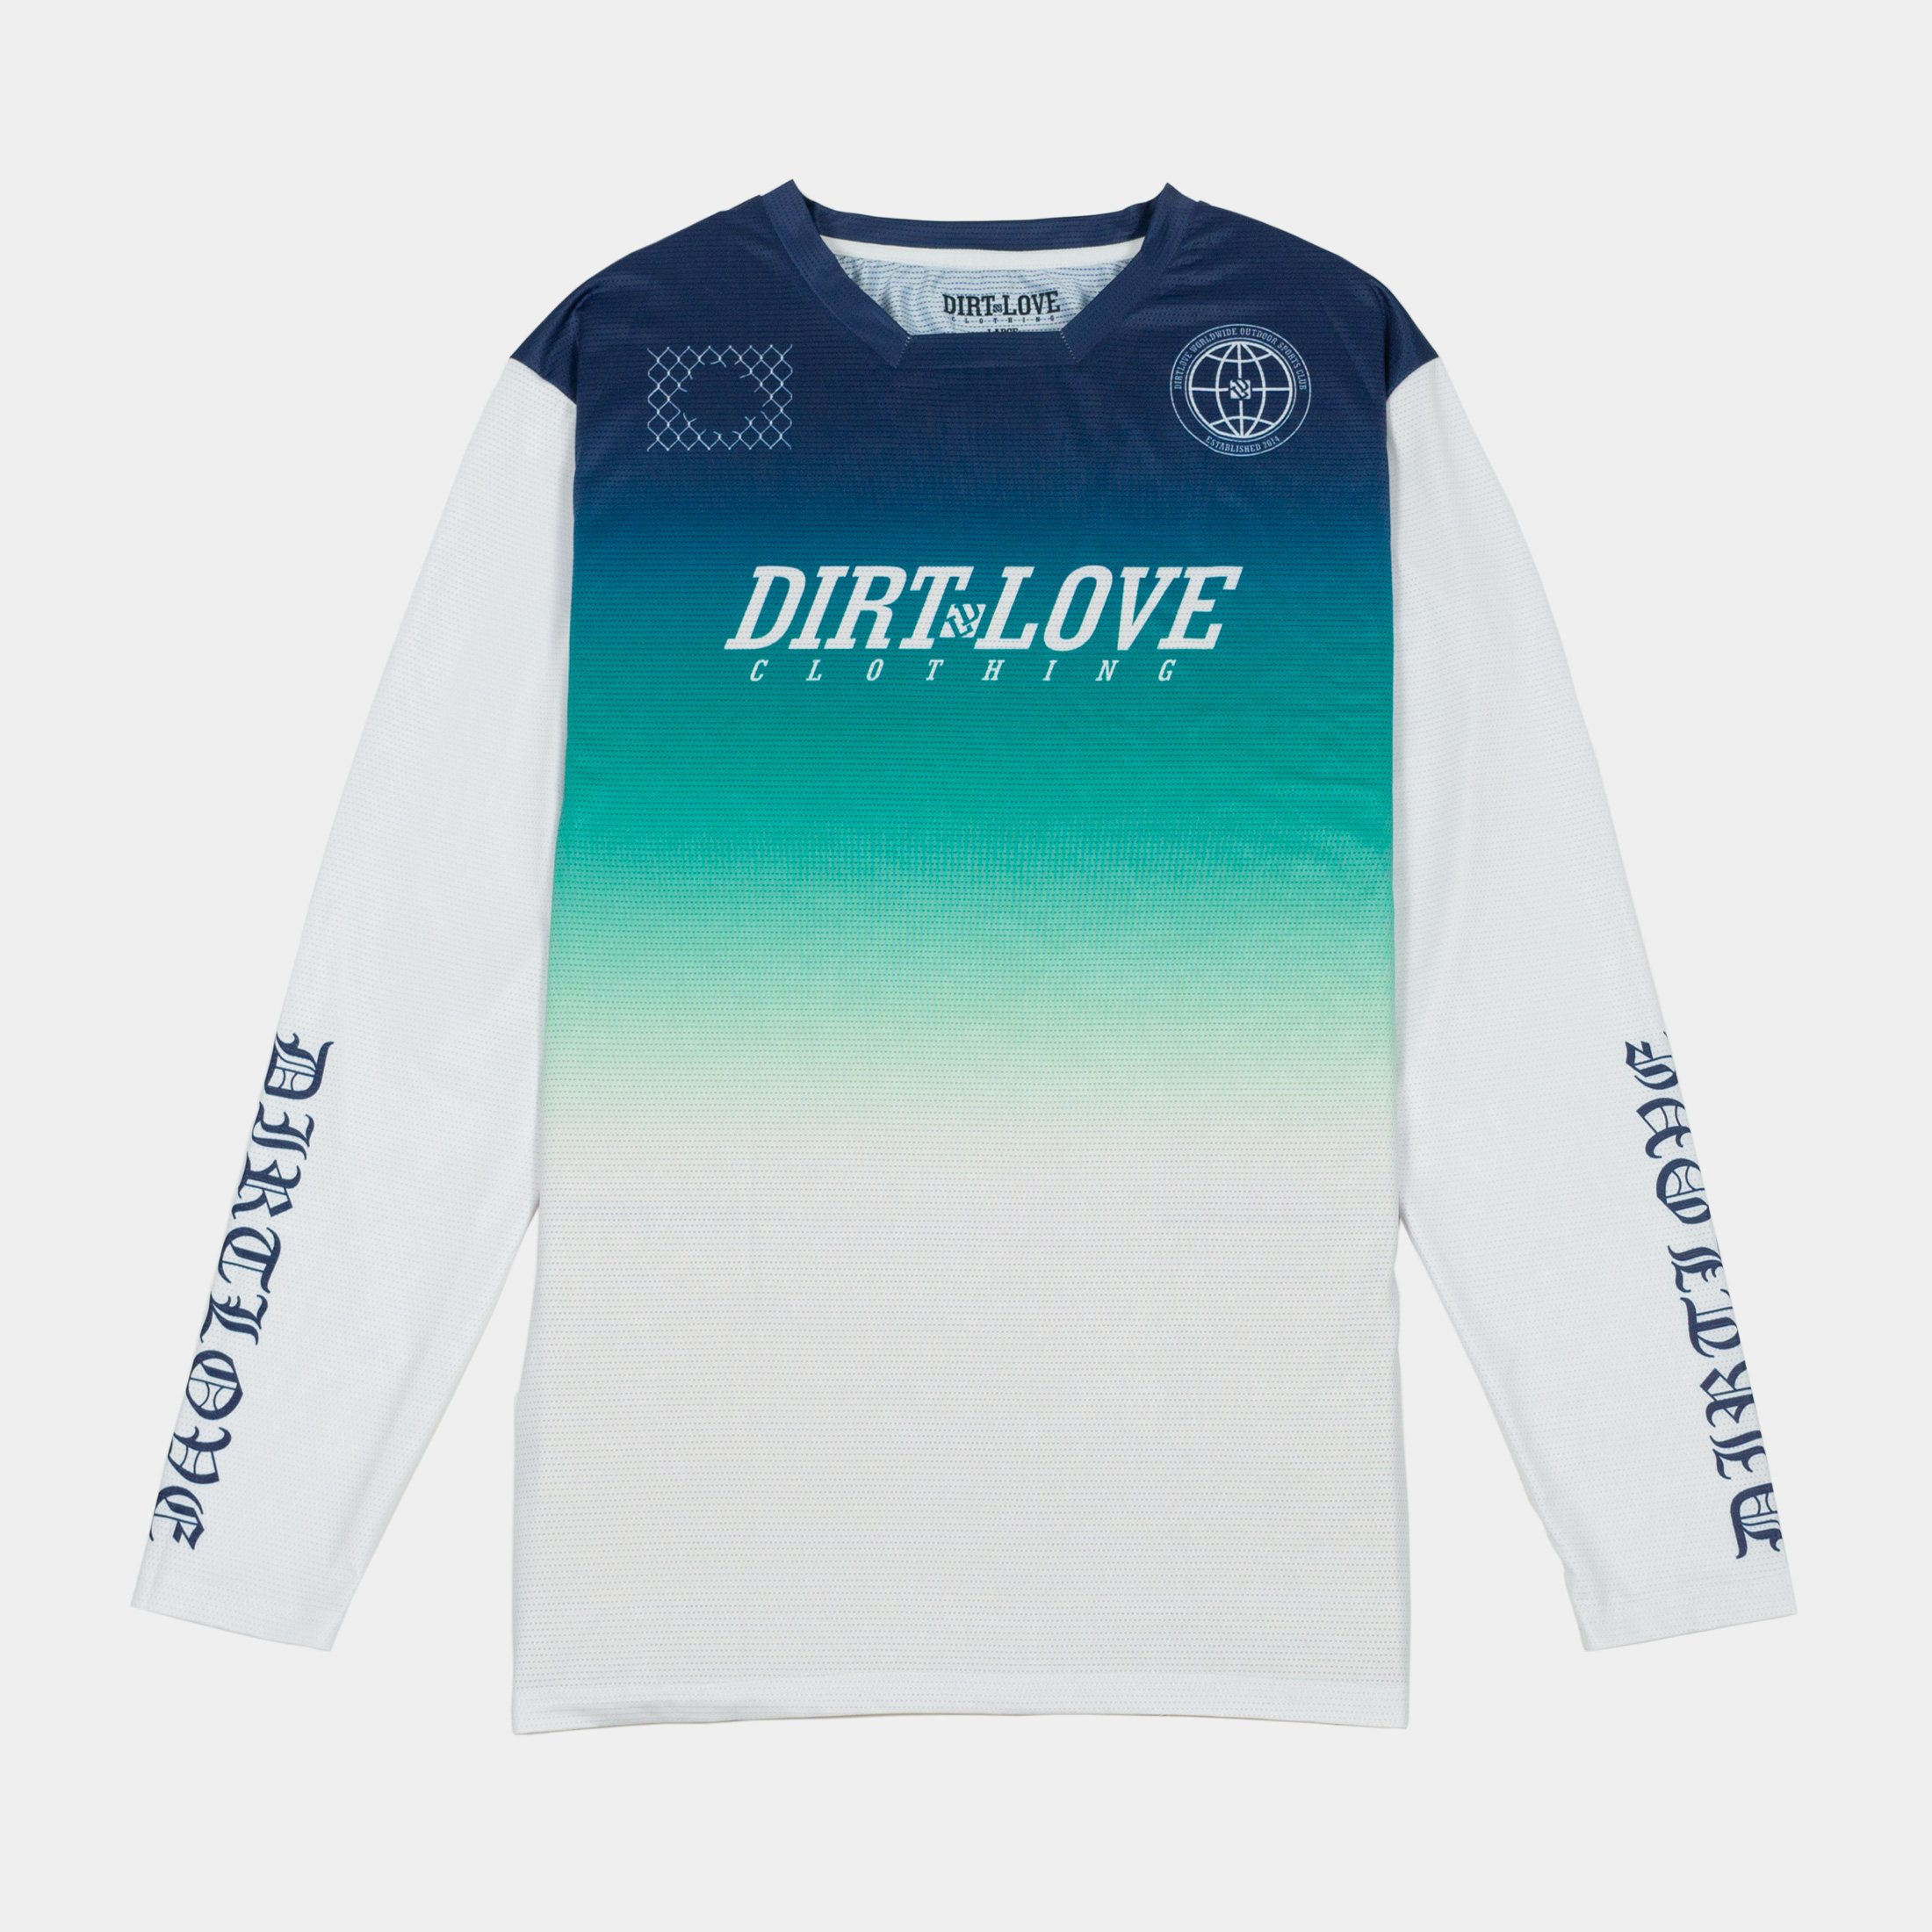 PROGRESSION RIDING JERSEY-TEAL